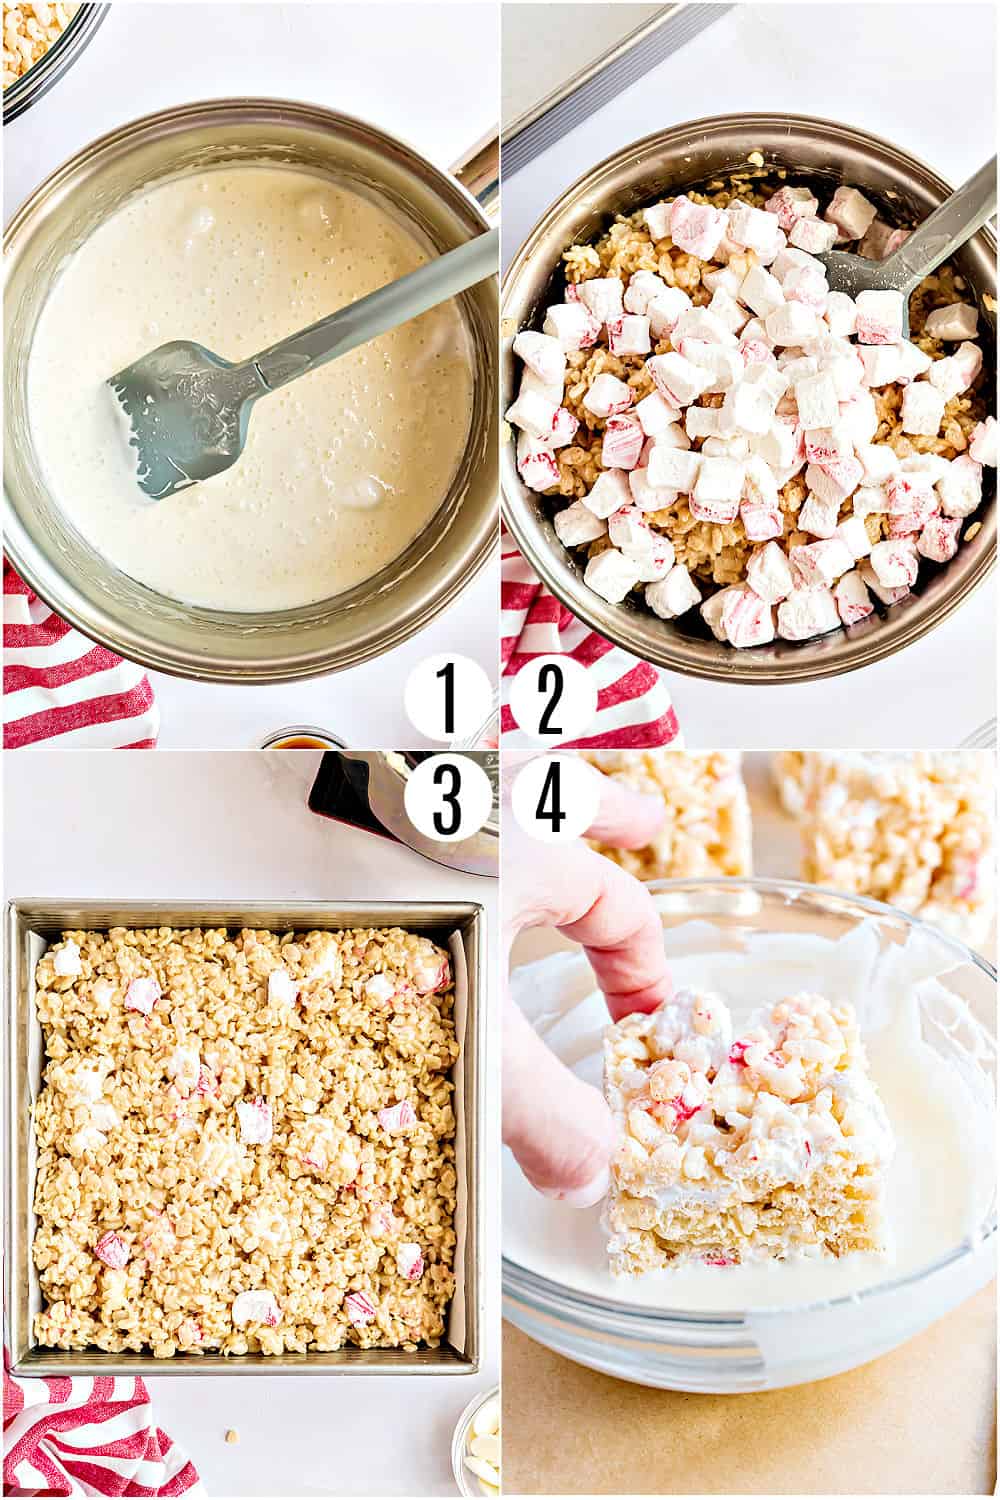 Step by step photos showing how to make peppermint rice krispie treats.